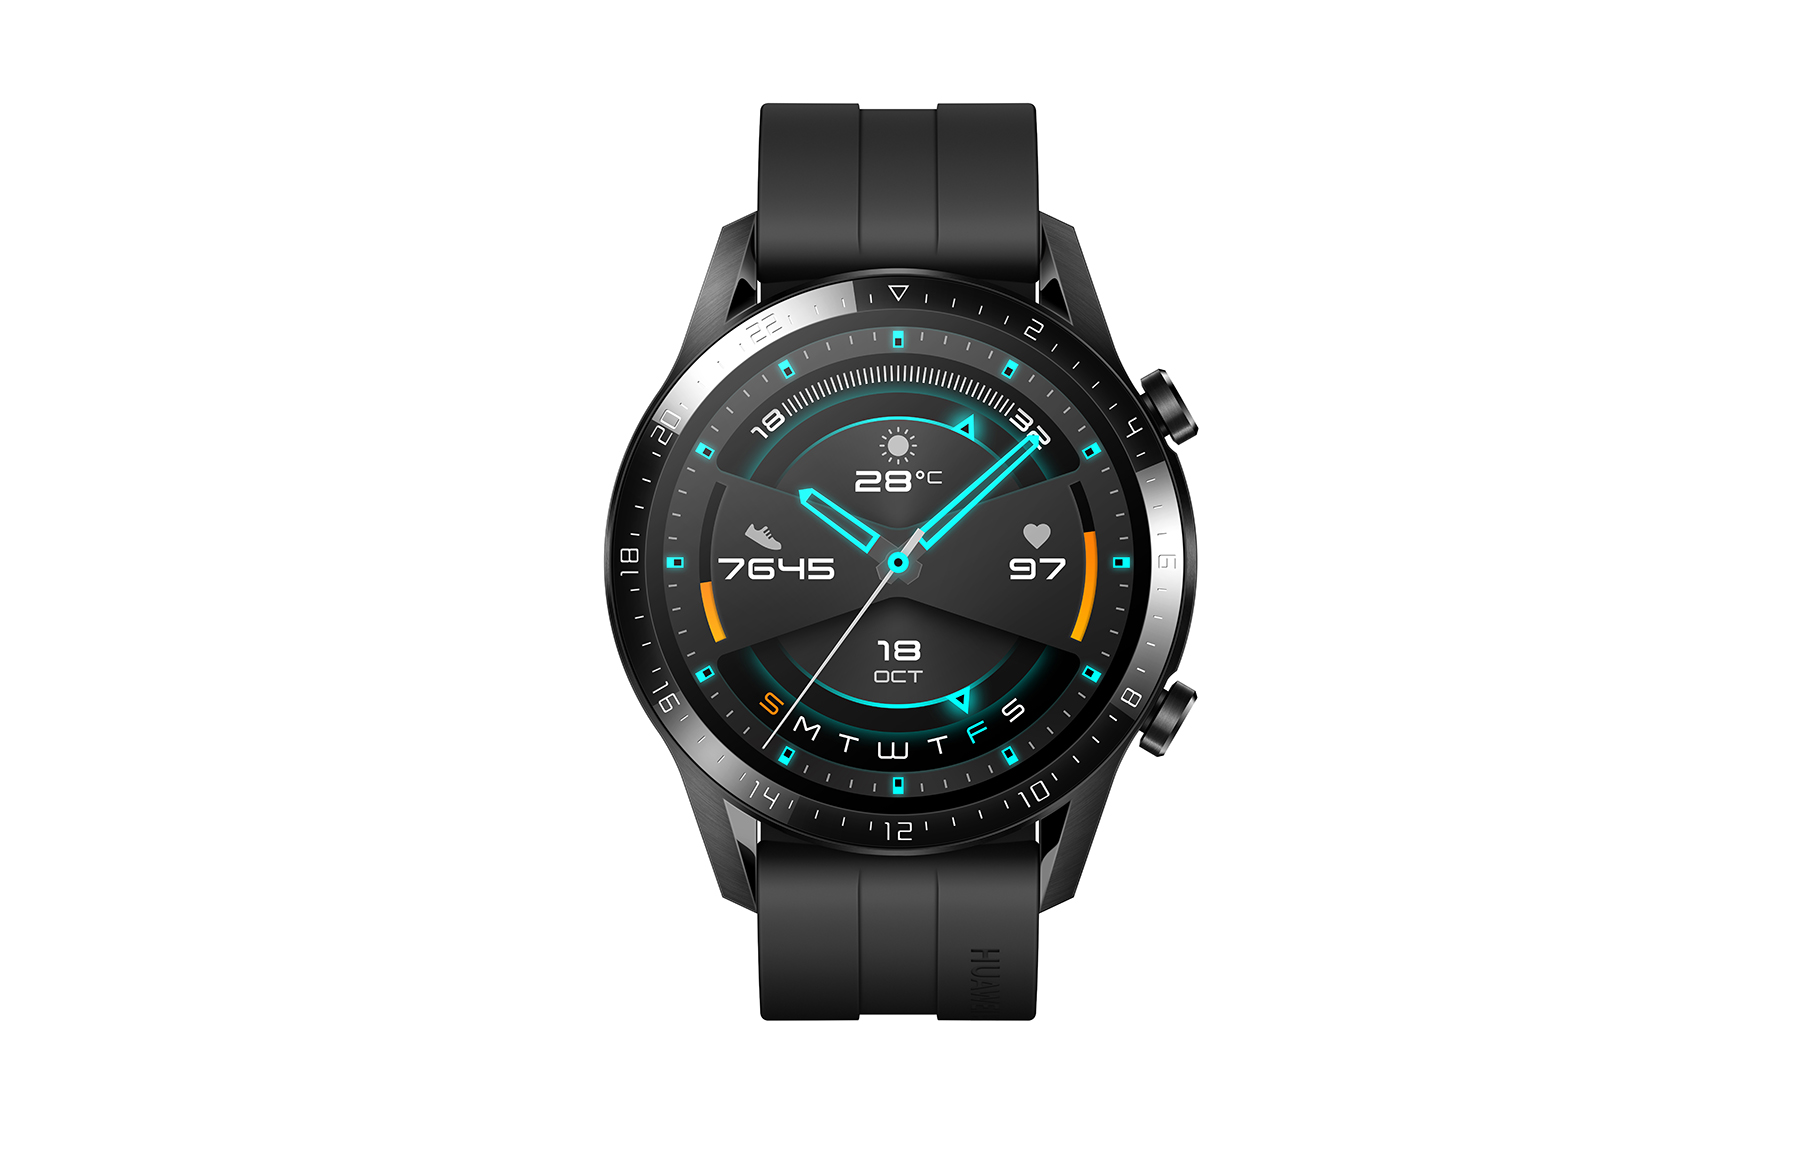 Huawei's Watch GT 2 is now available with great battery life, new workout courses, calls and music playback - Alvinology